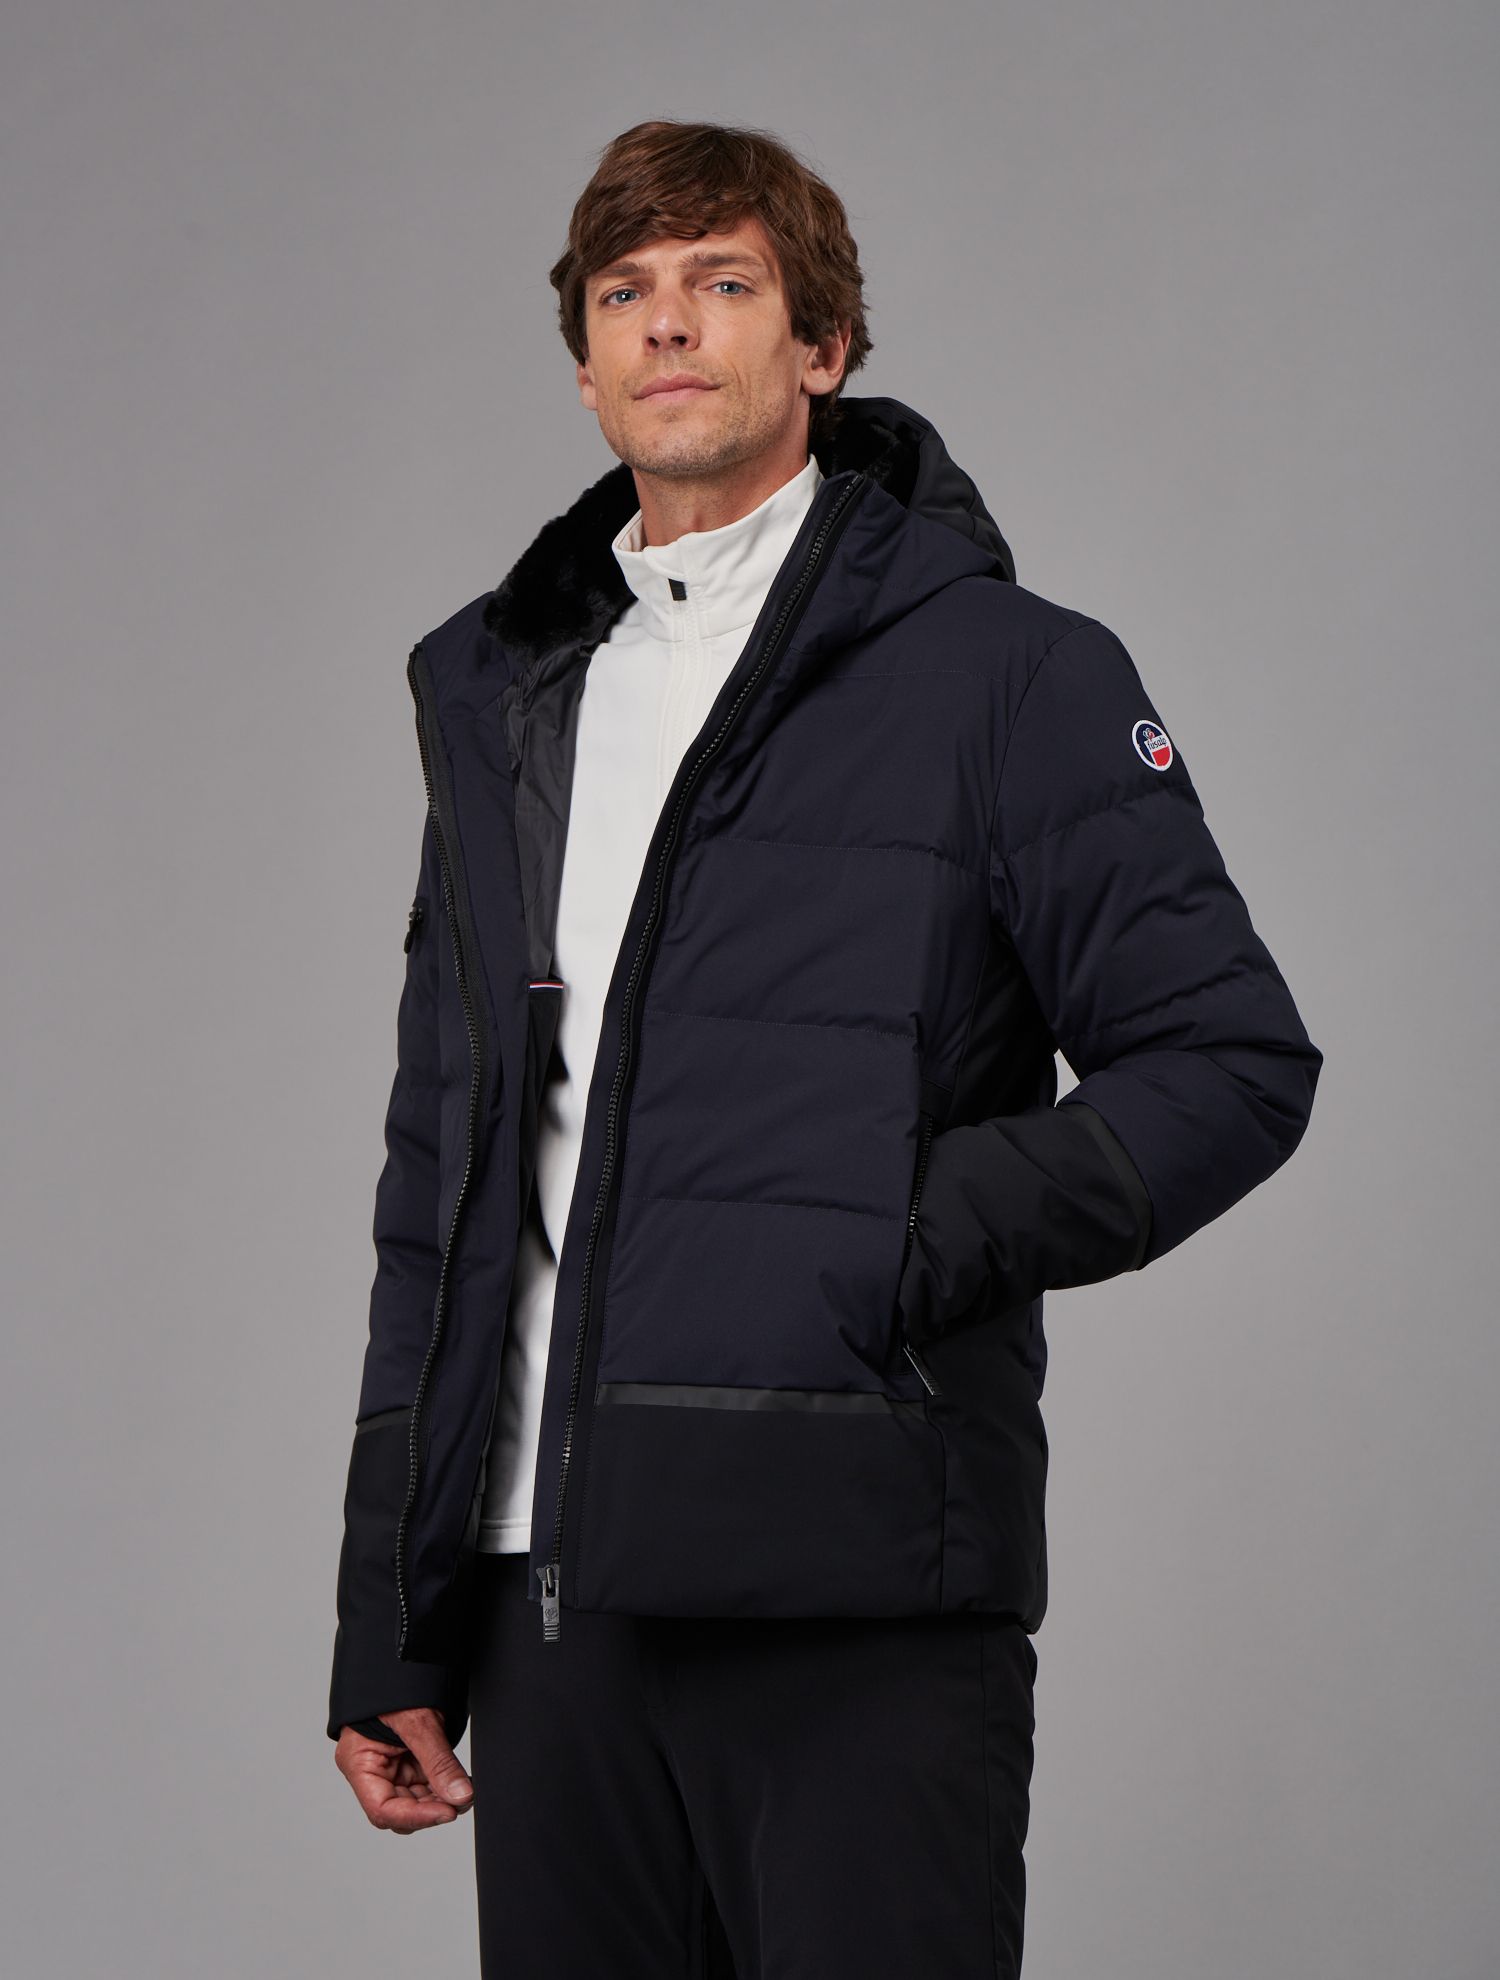 Fusalp - Abel jacket: stretch ski jacket with lined high collar and hood